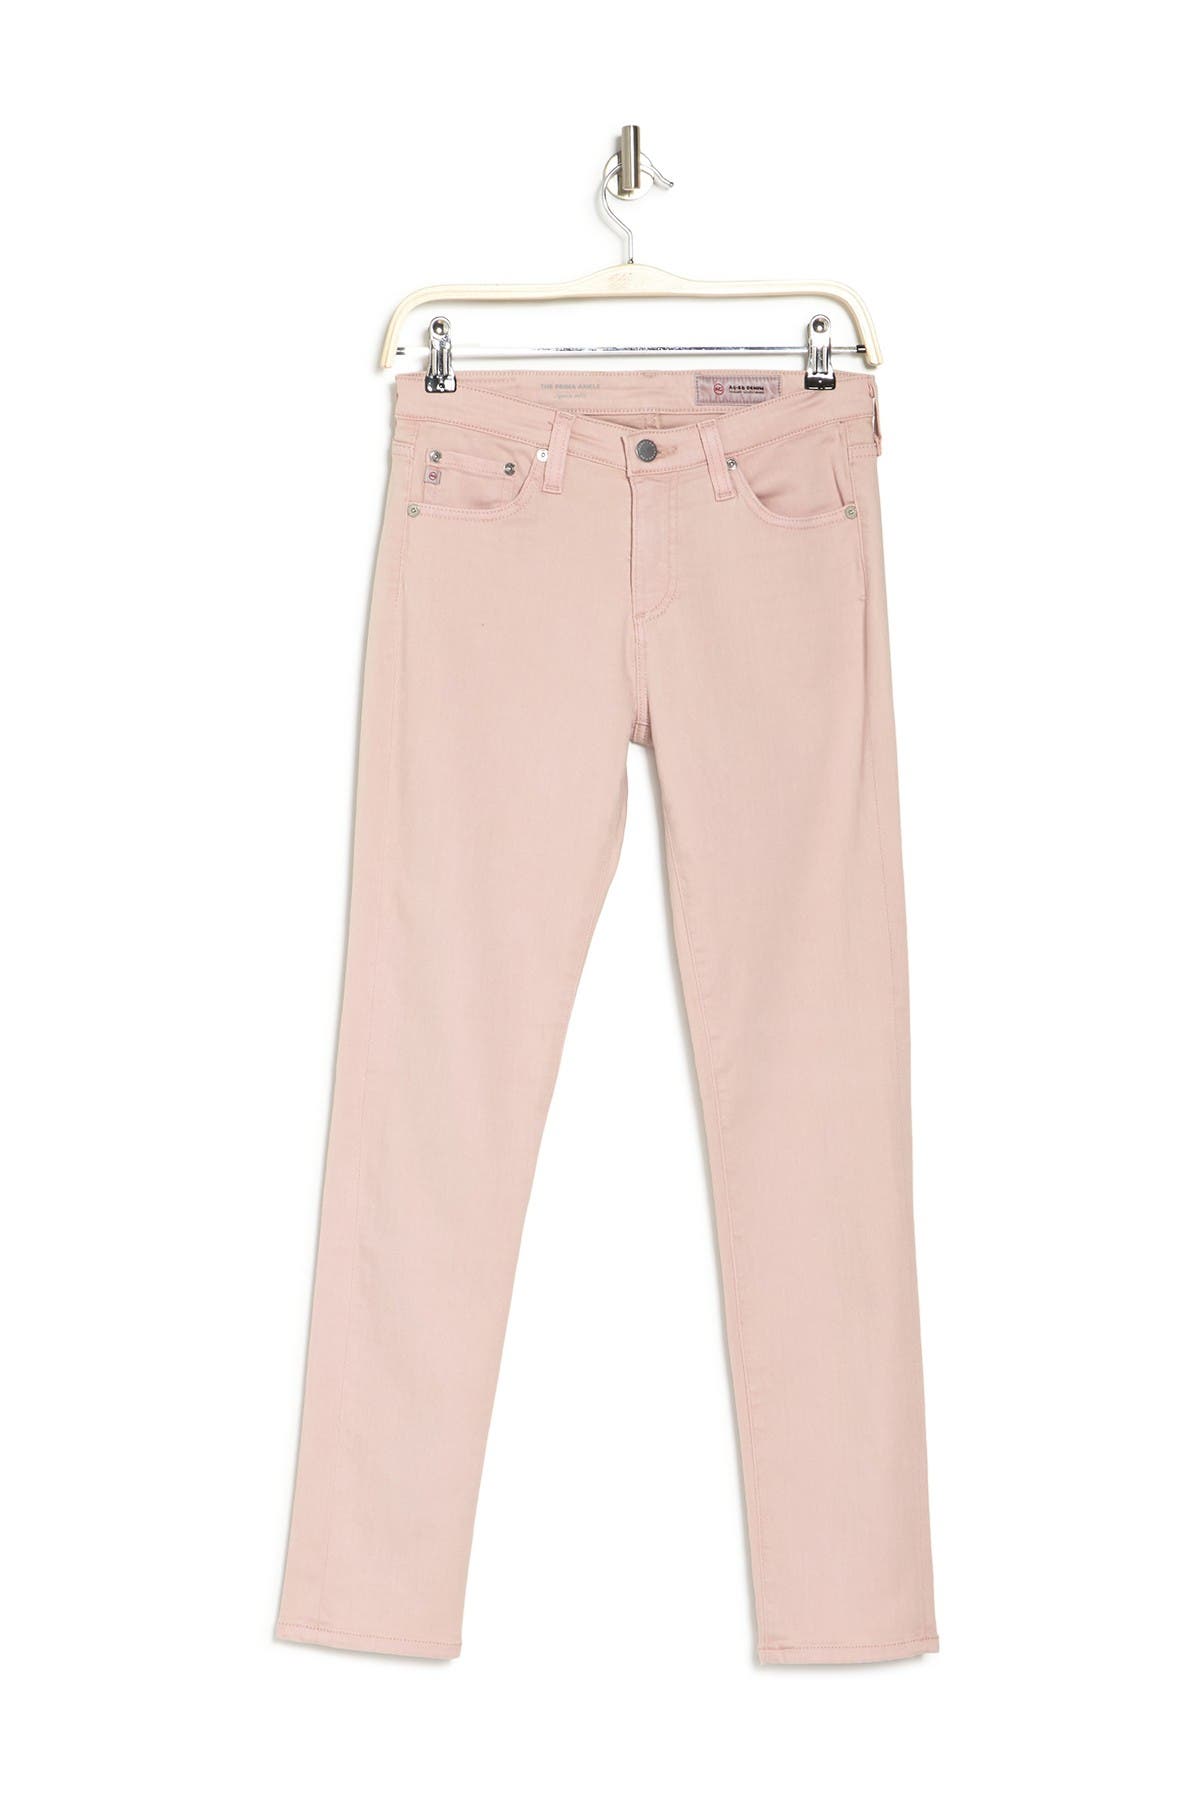 Ag Prima Ankle Jeans In 1 Year Sulfur Peaked Pink